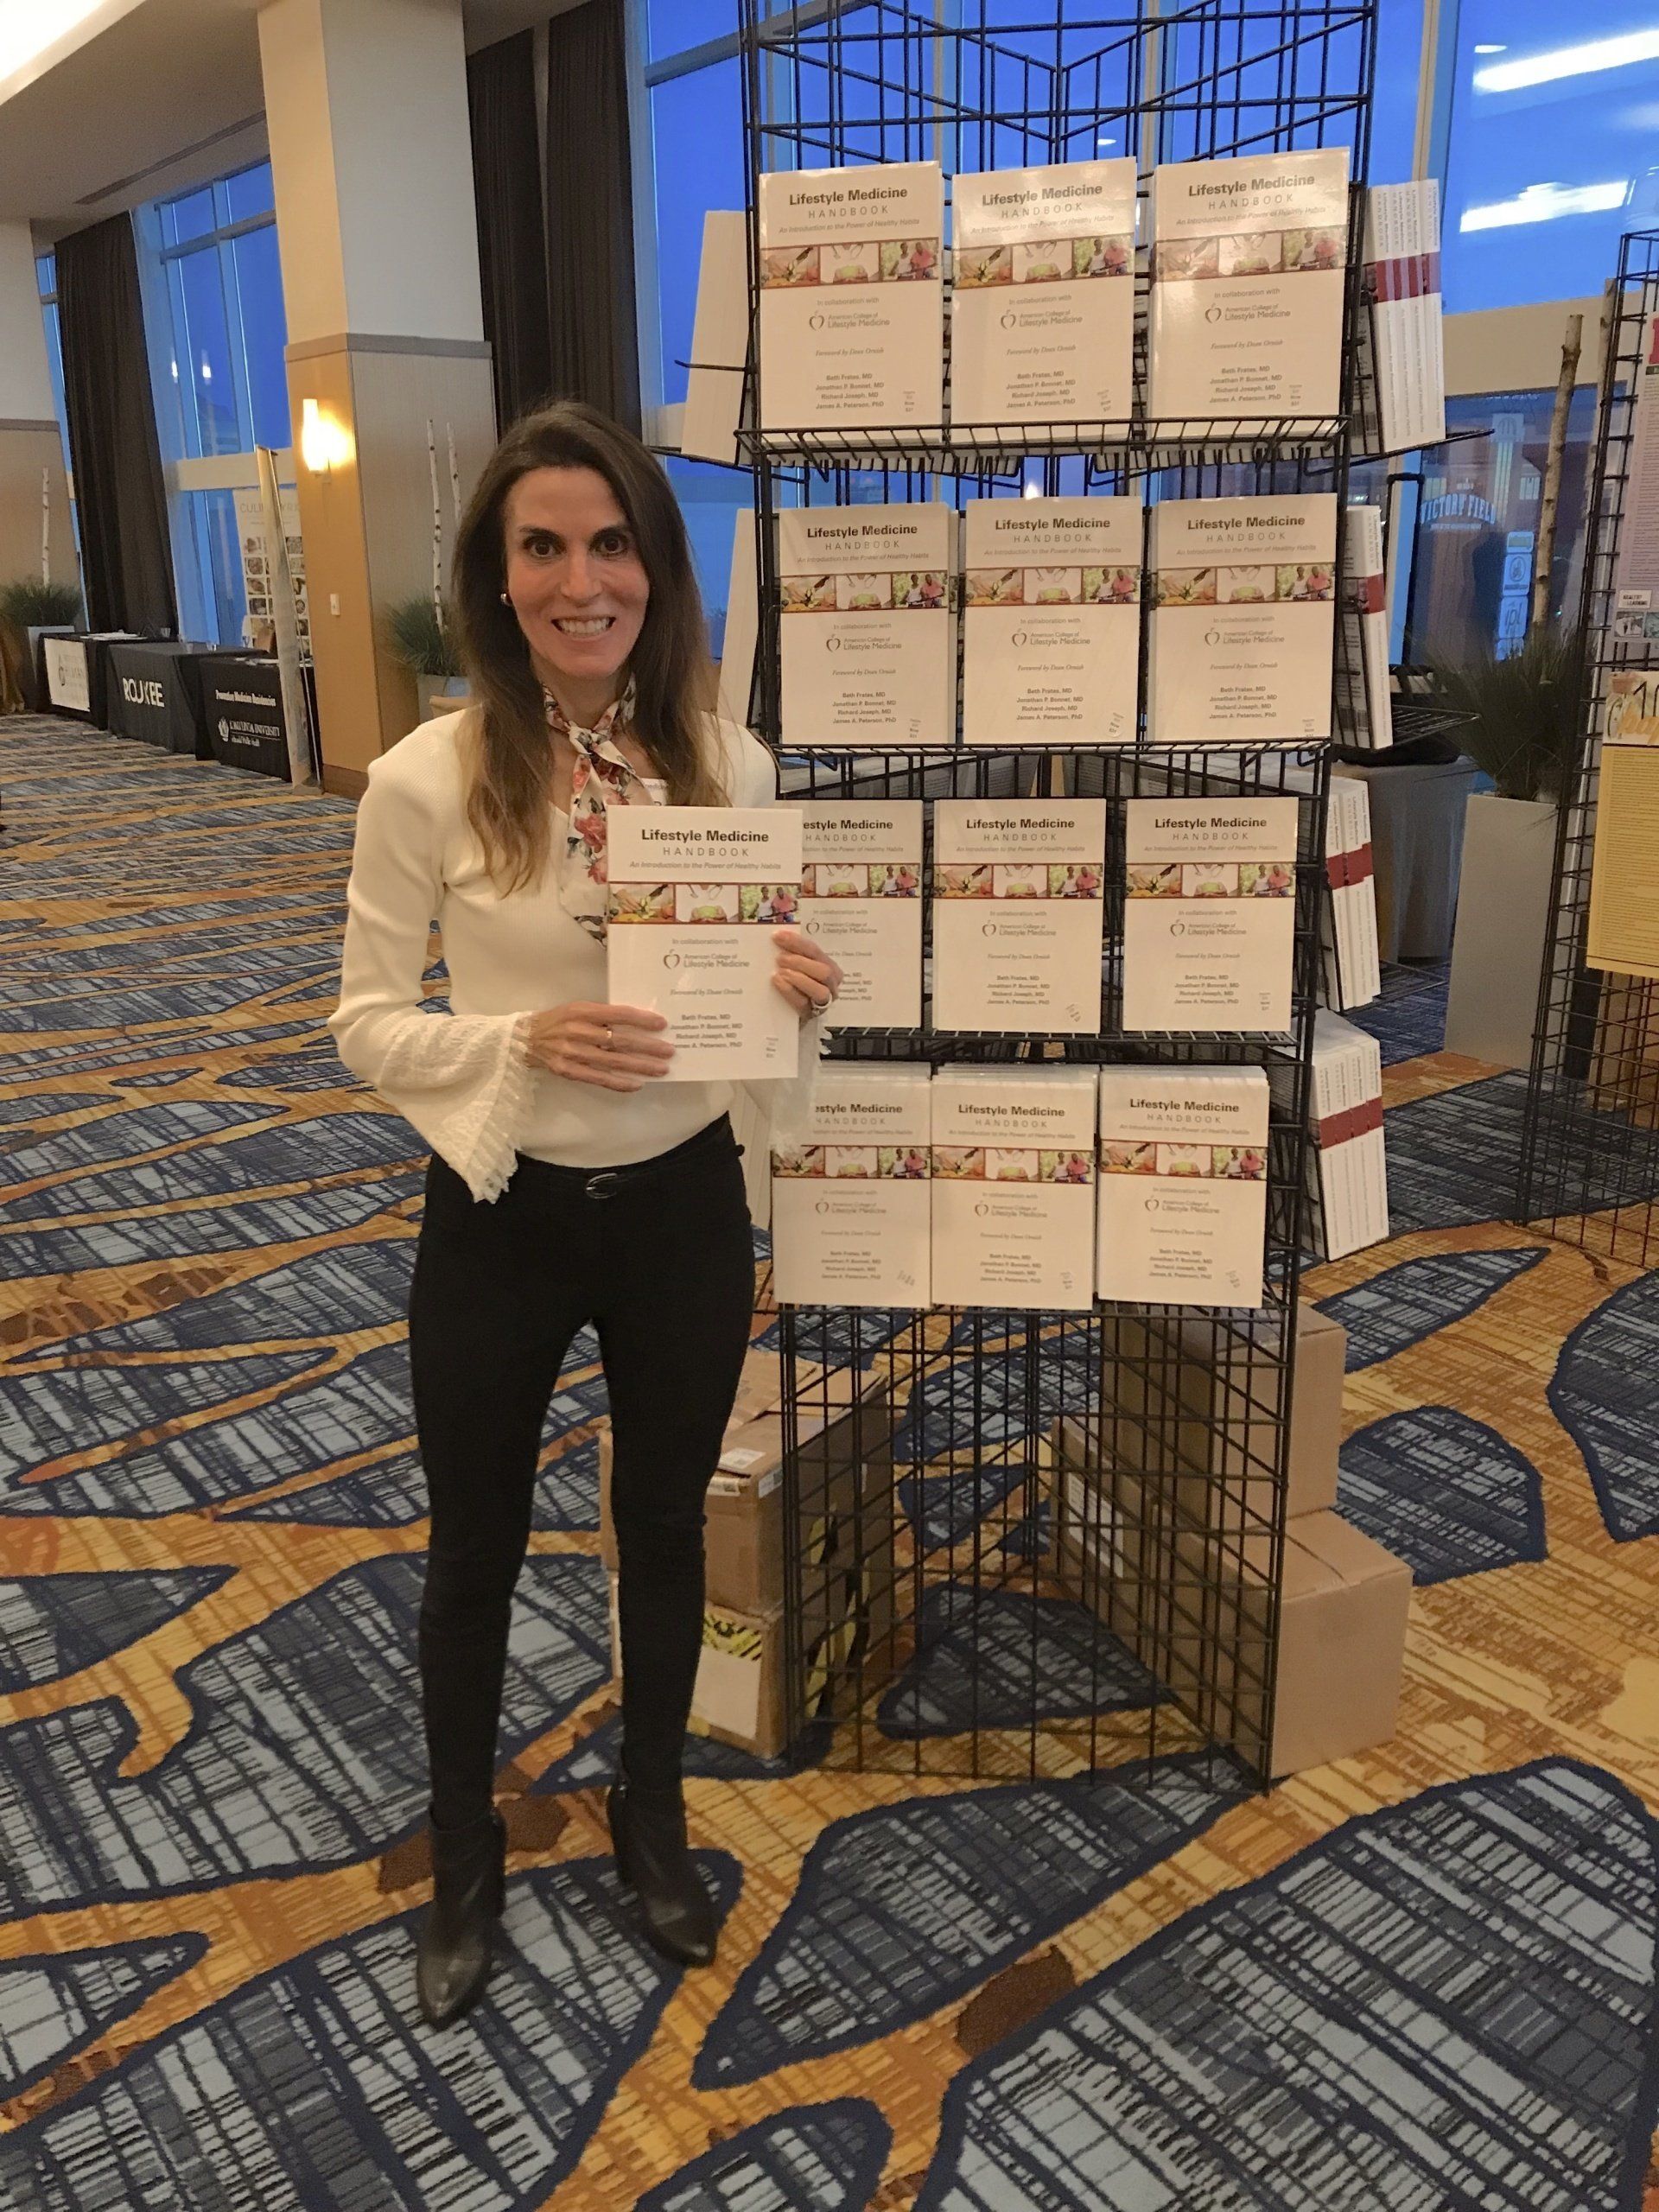 Dr. Beth Frates at the 2018 ACLM conference with copies of her book The Lifestyle Medicine Handbook: An Introduction to the Power of Healthy Habits.